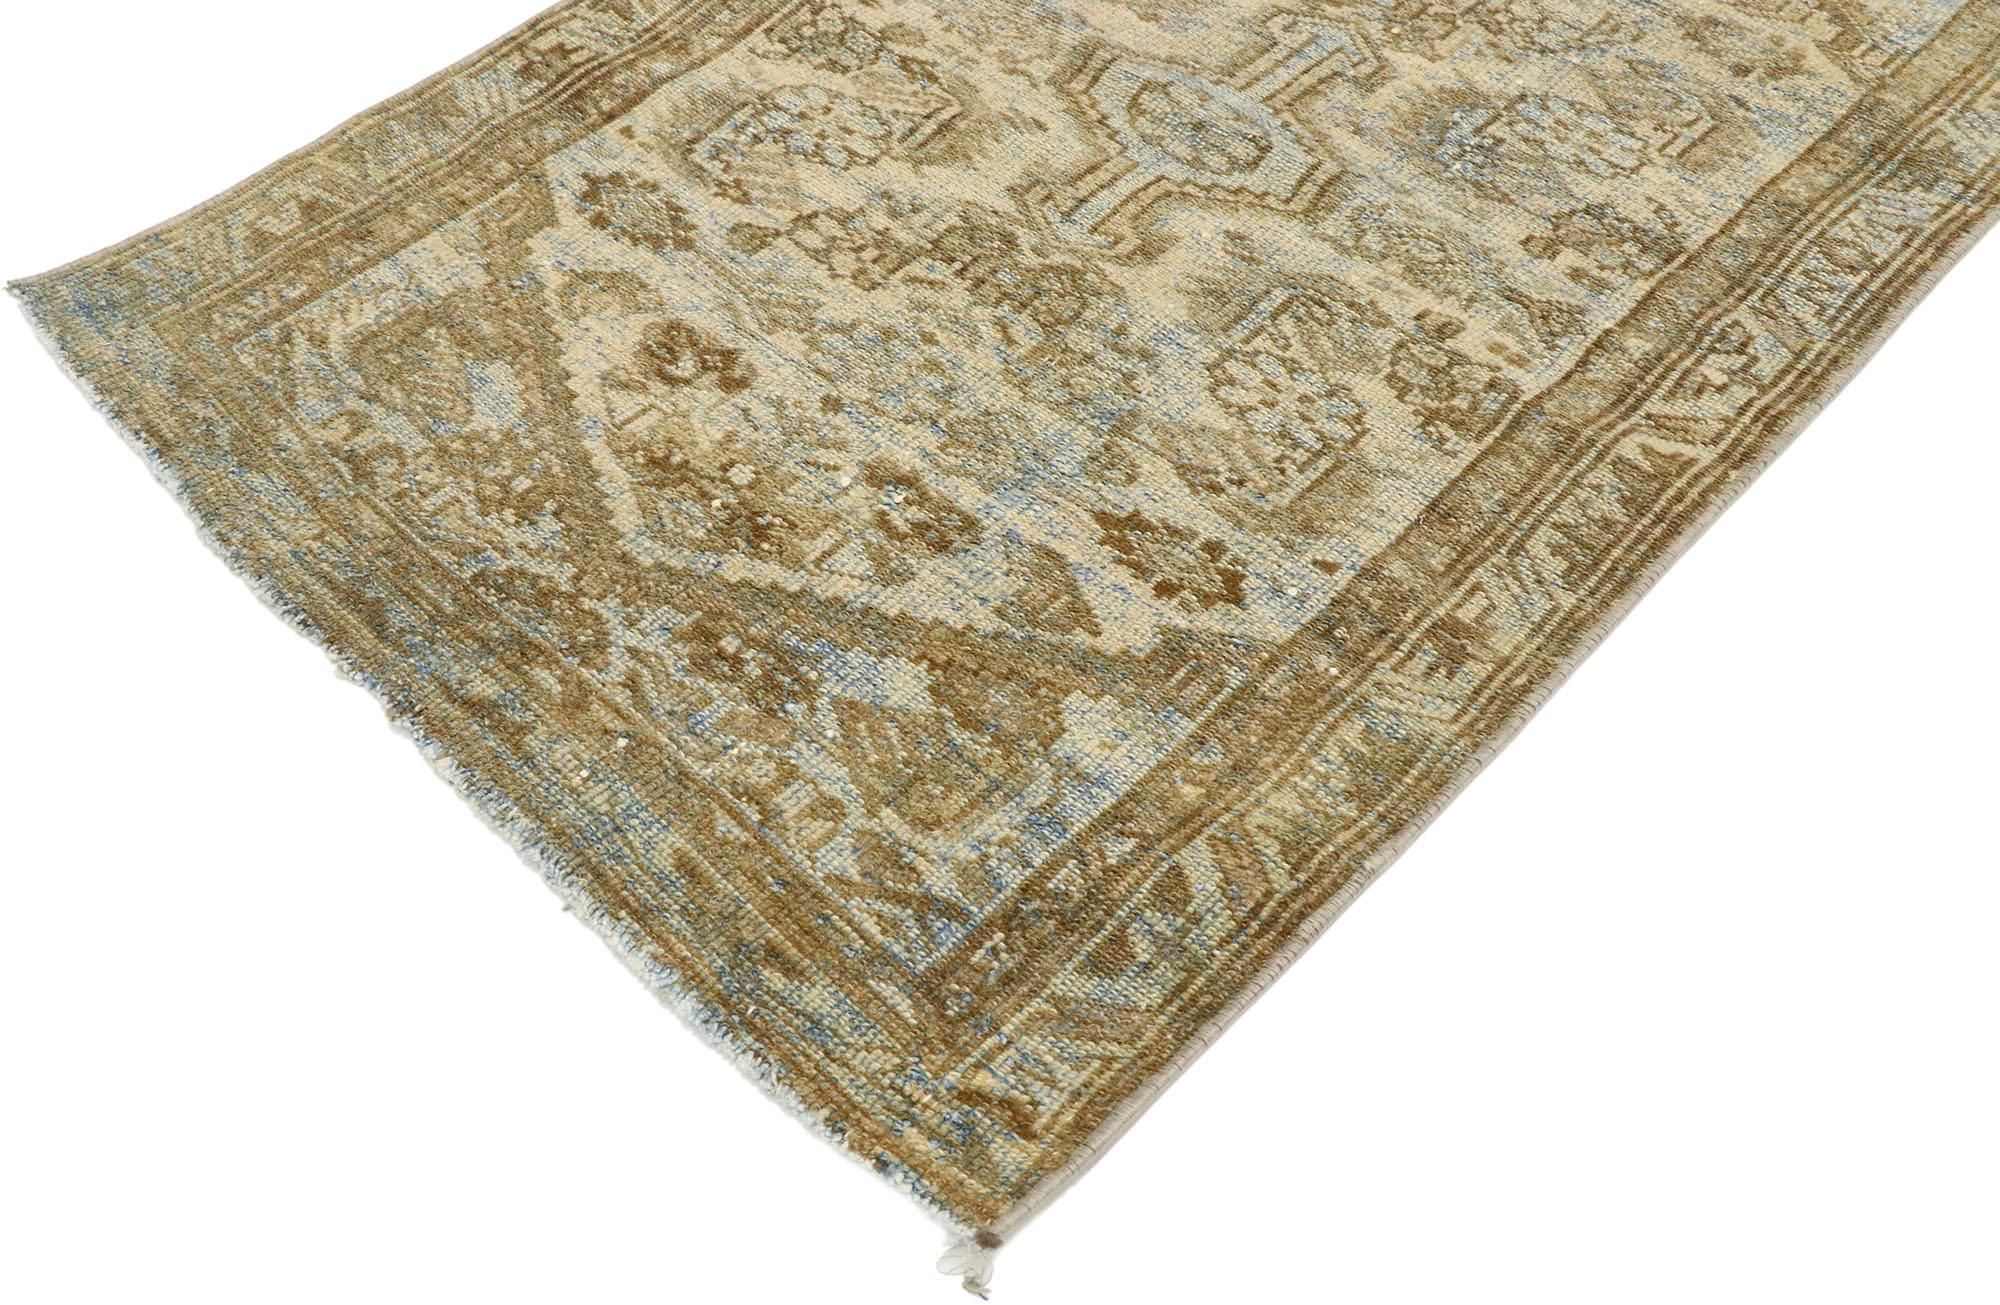 53090, distressed vintage Persian Hamadan rug with Gustavian style. Lovingly timeworn with Gustavian grace, this hand knotted wool distressed vintage Persian Hamadan rug displays nostalgic charm and inimitable warmth. The antique washed field